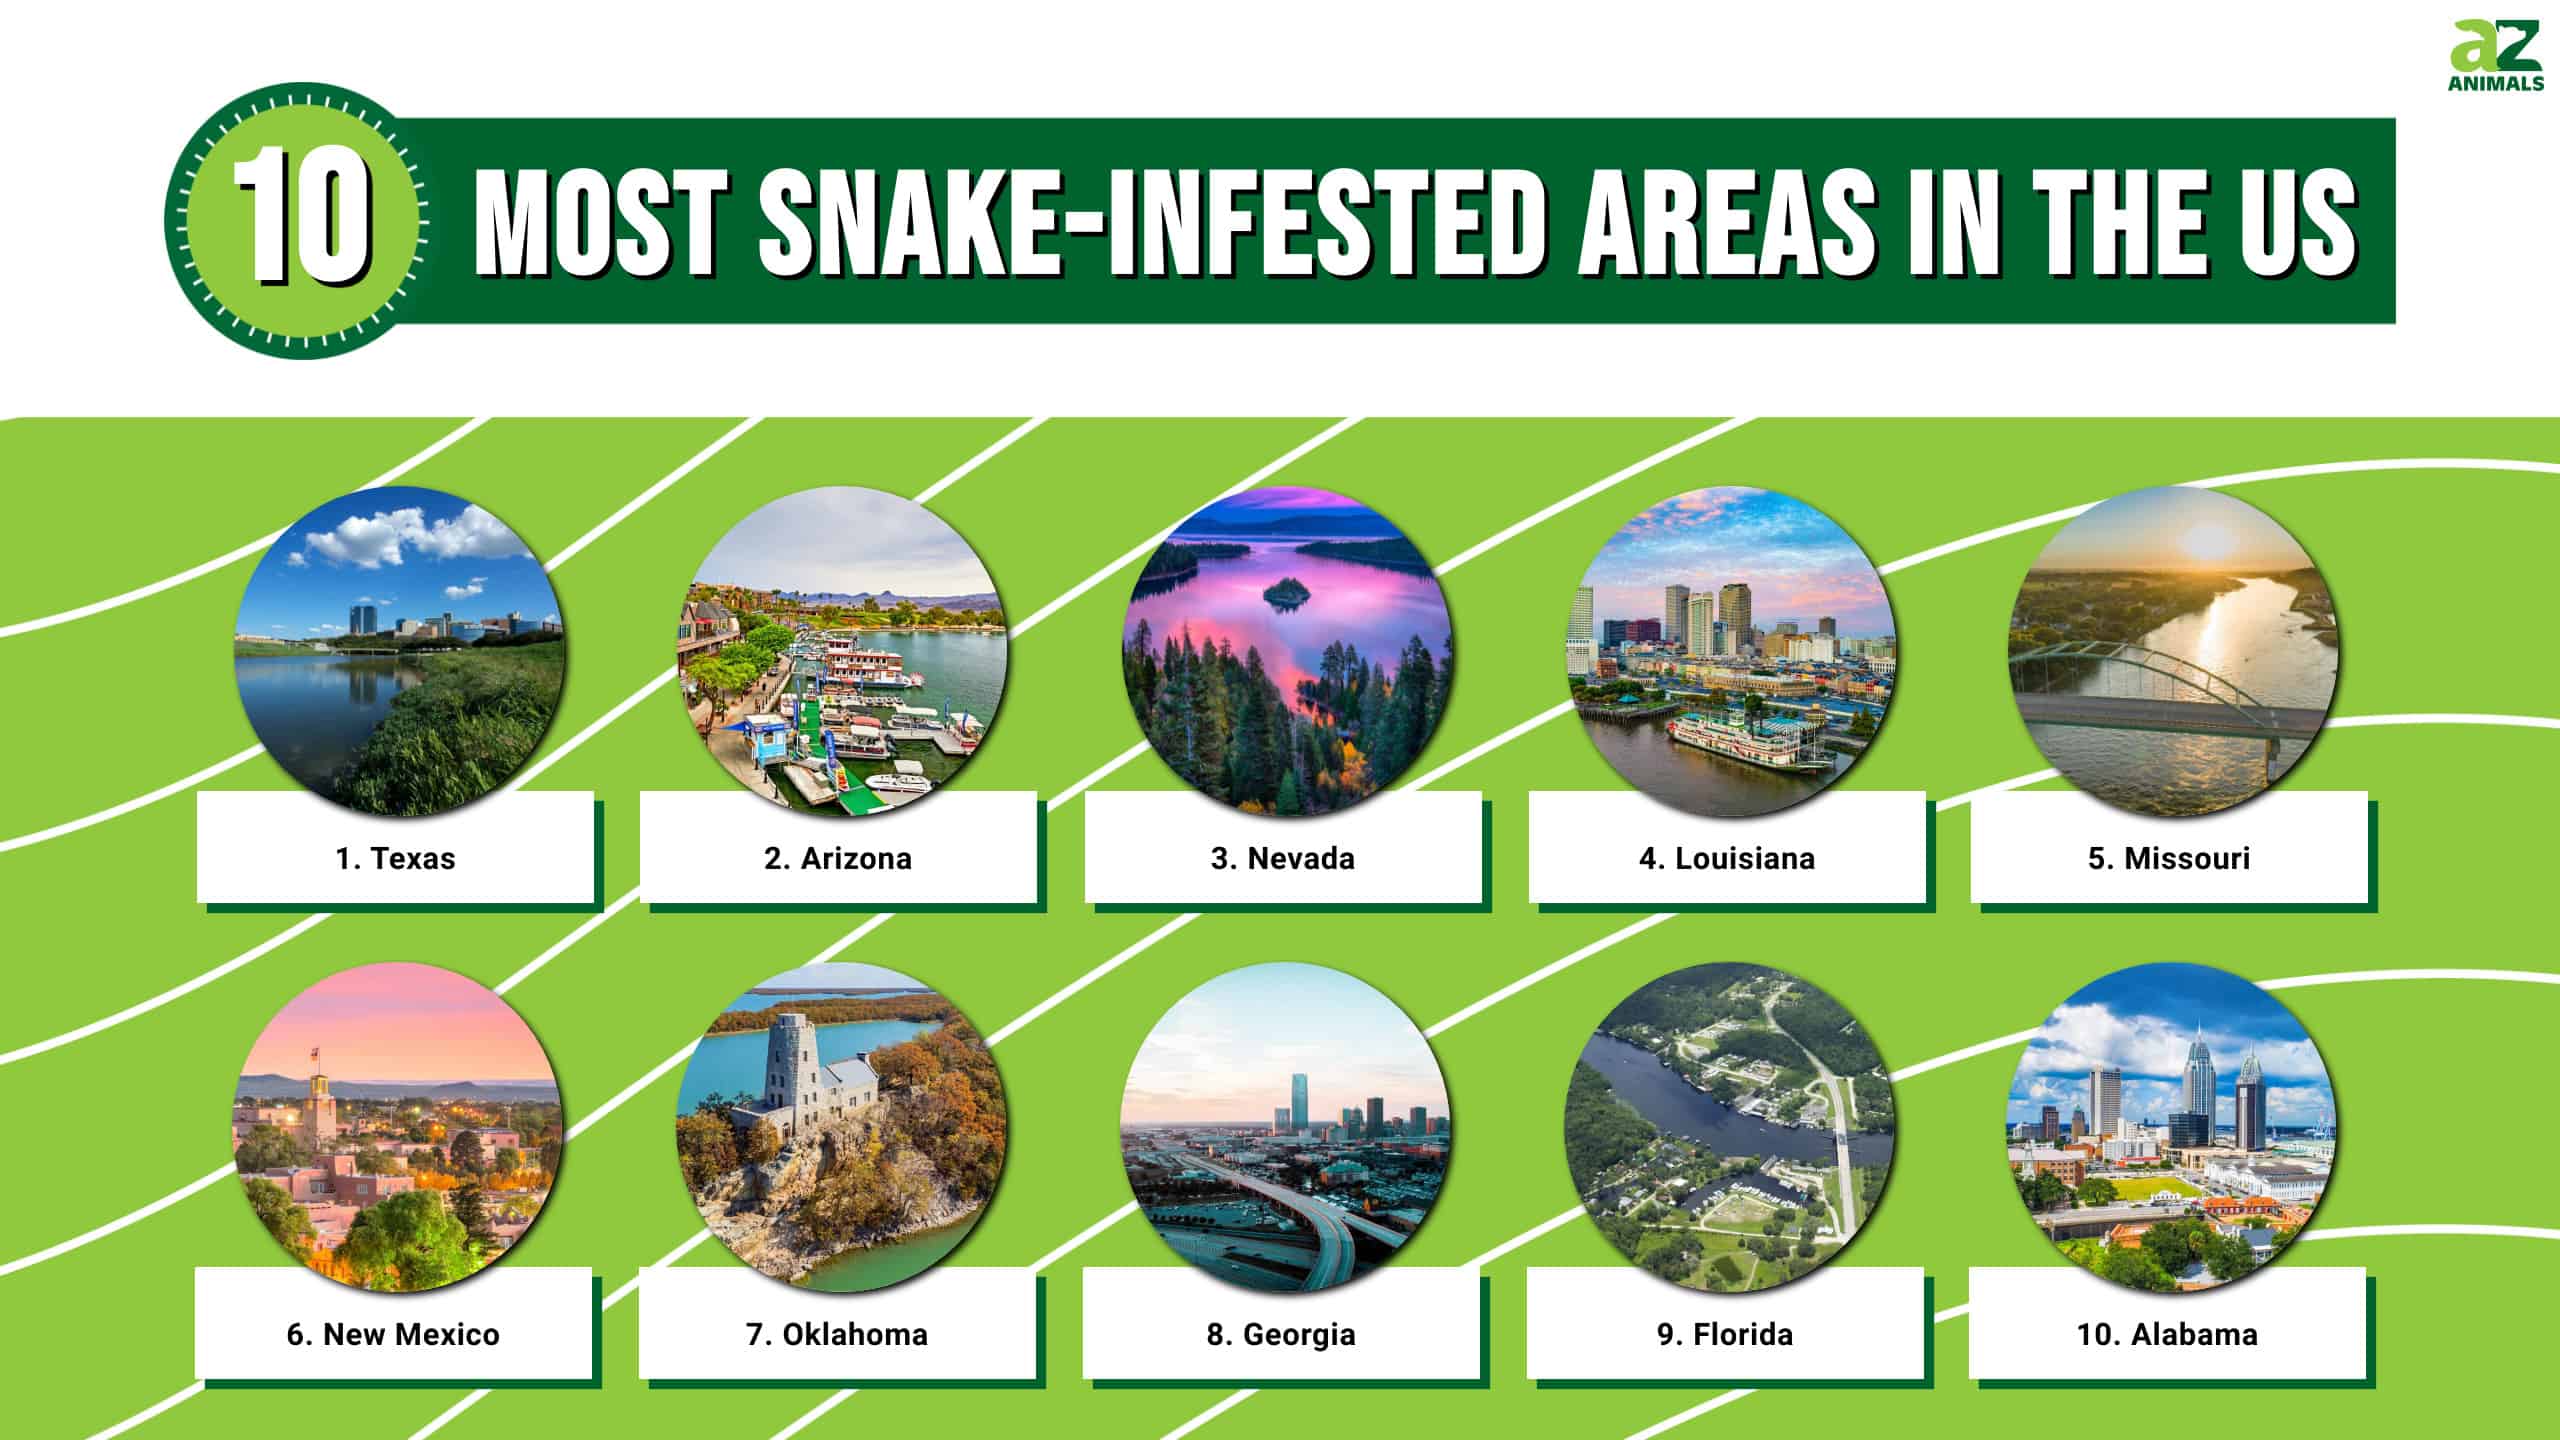 7 Countries With the Most Viper Sightings